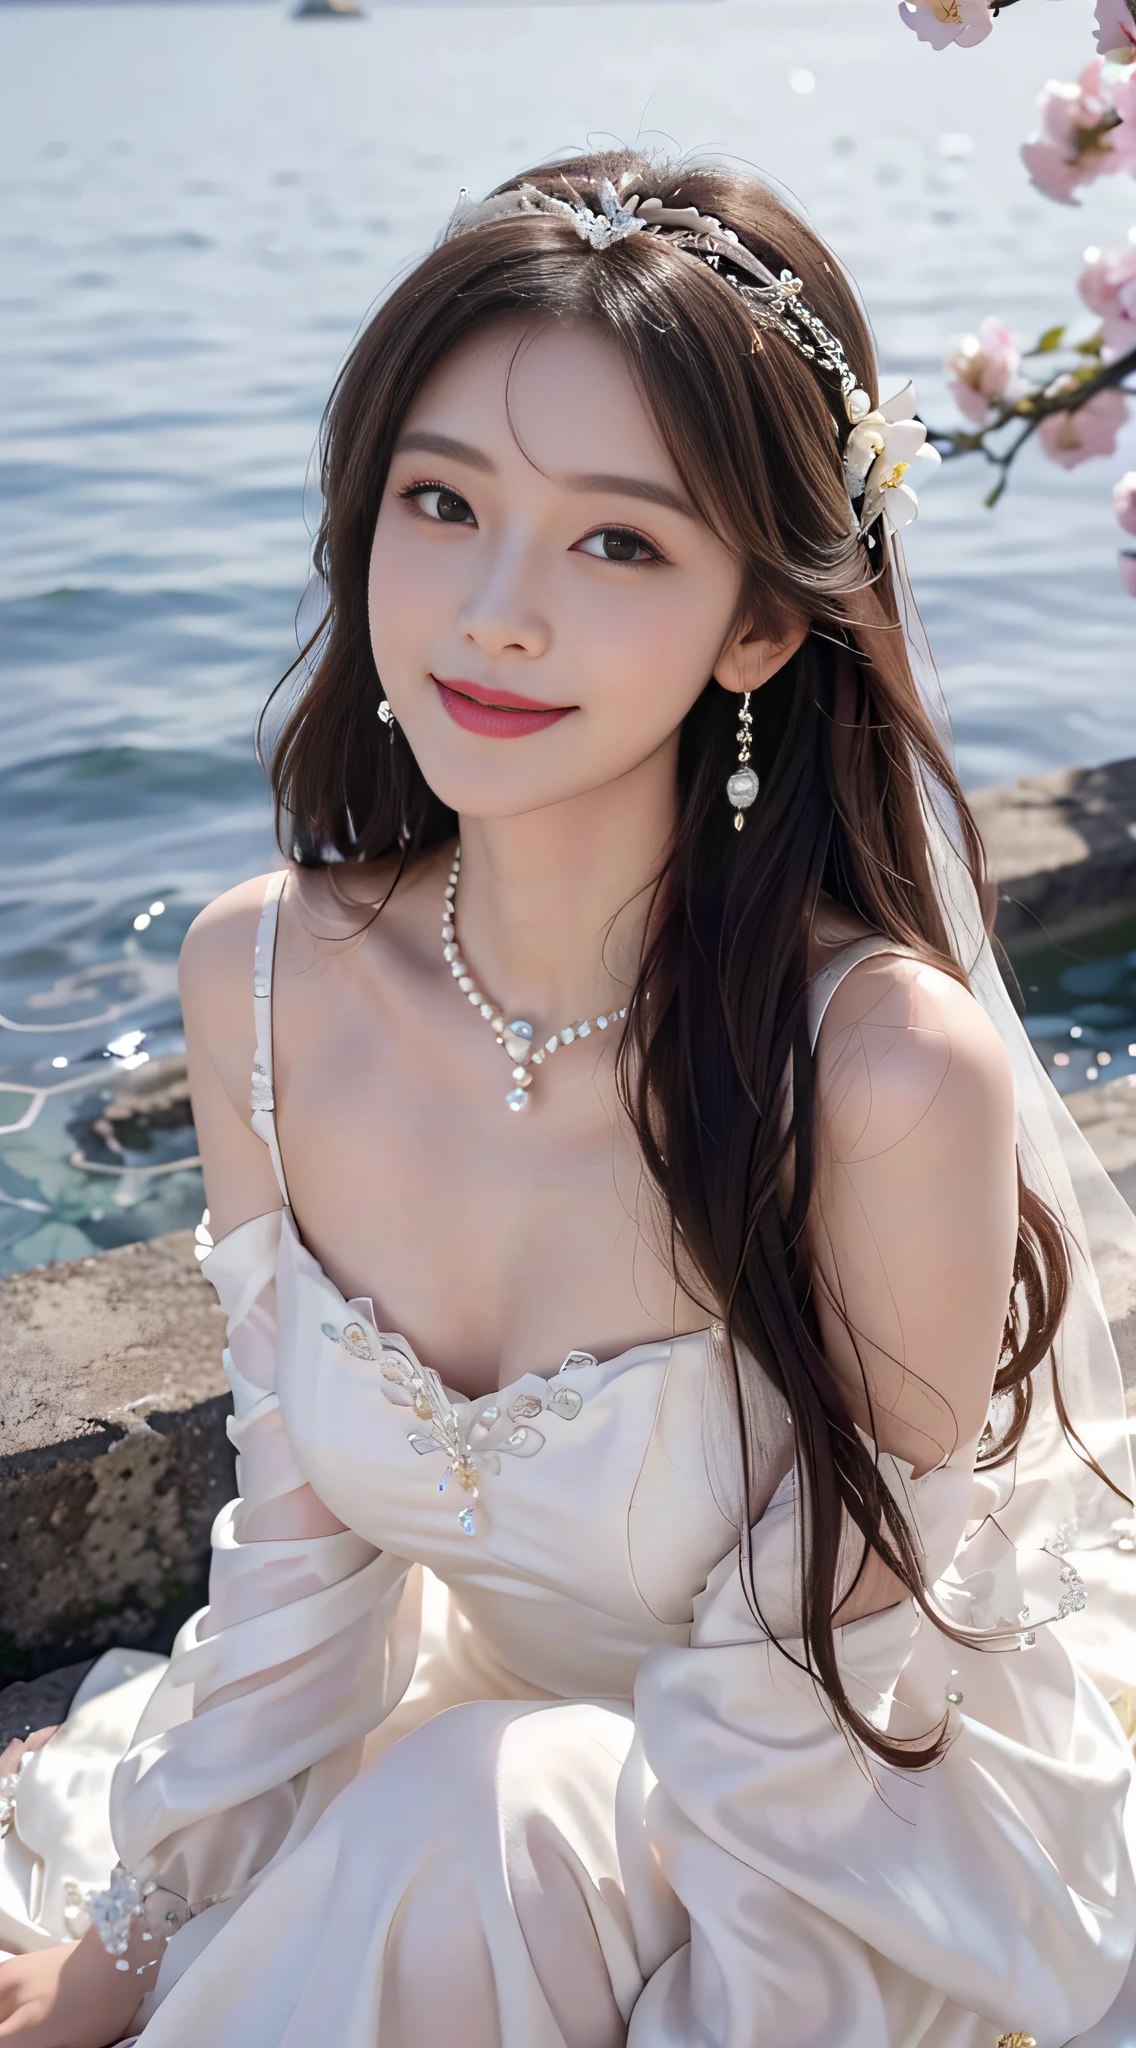 A beautyful girl，long whitr hair，(Wear a beautiful wedding dress)，A delicate crown was worn over his hair，A pair of shiny pearl earrings hang from the ears，A beautiful necklace was worn around his neck，Sweet smiling，His face flushed，ssmile，(Flower sea background)